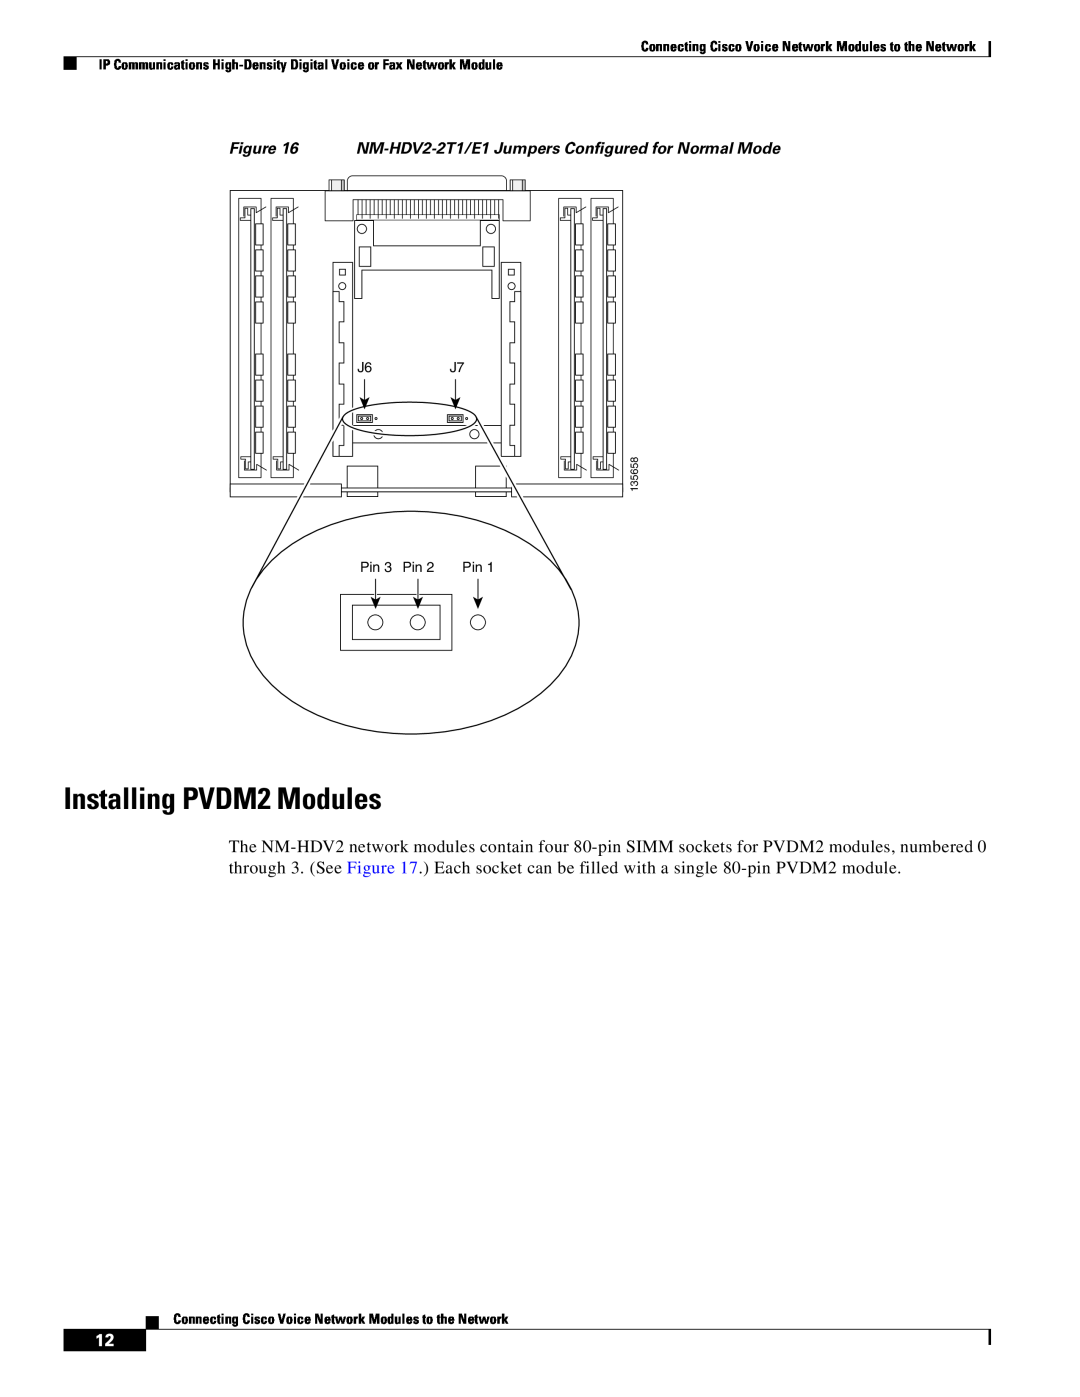 Cisco Systems OL-12812-01 manual Installing PVDM2 Modules, NM-HDV2-2T1/E1 Jumpers Configured for Normal Mode, Pin 3 Pin 